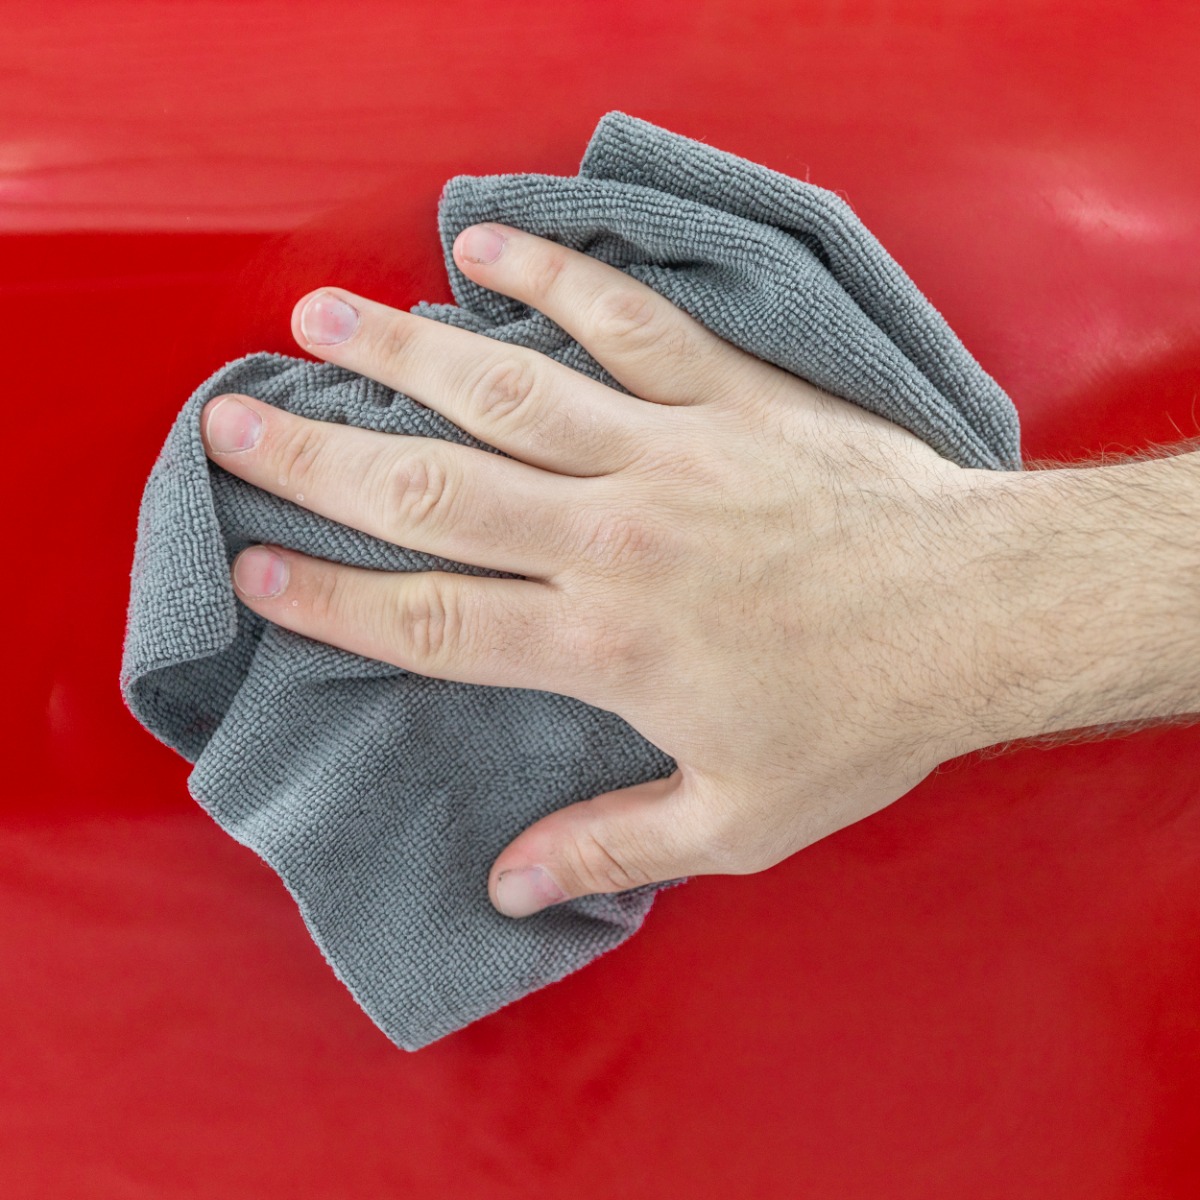 Wiping excess product from car body